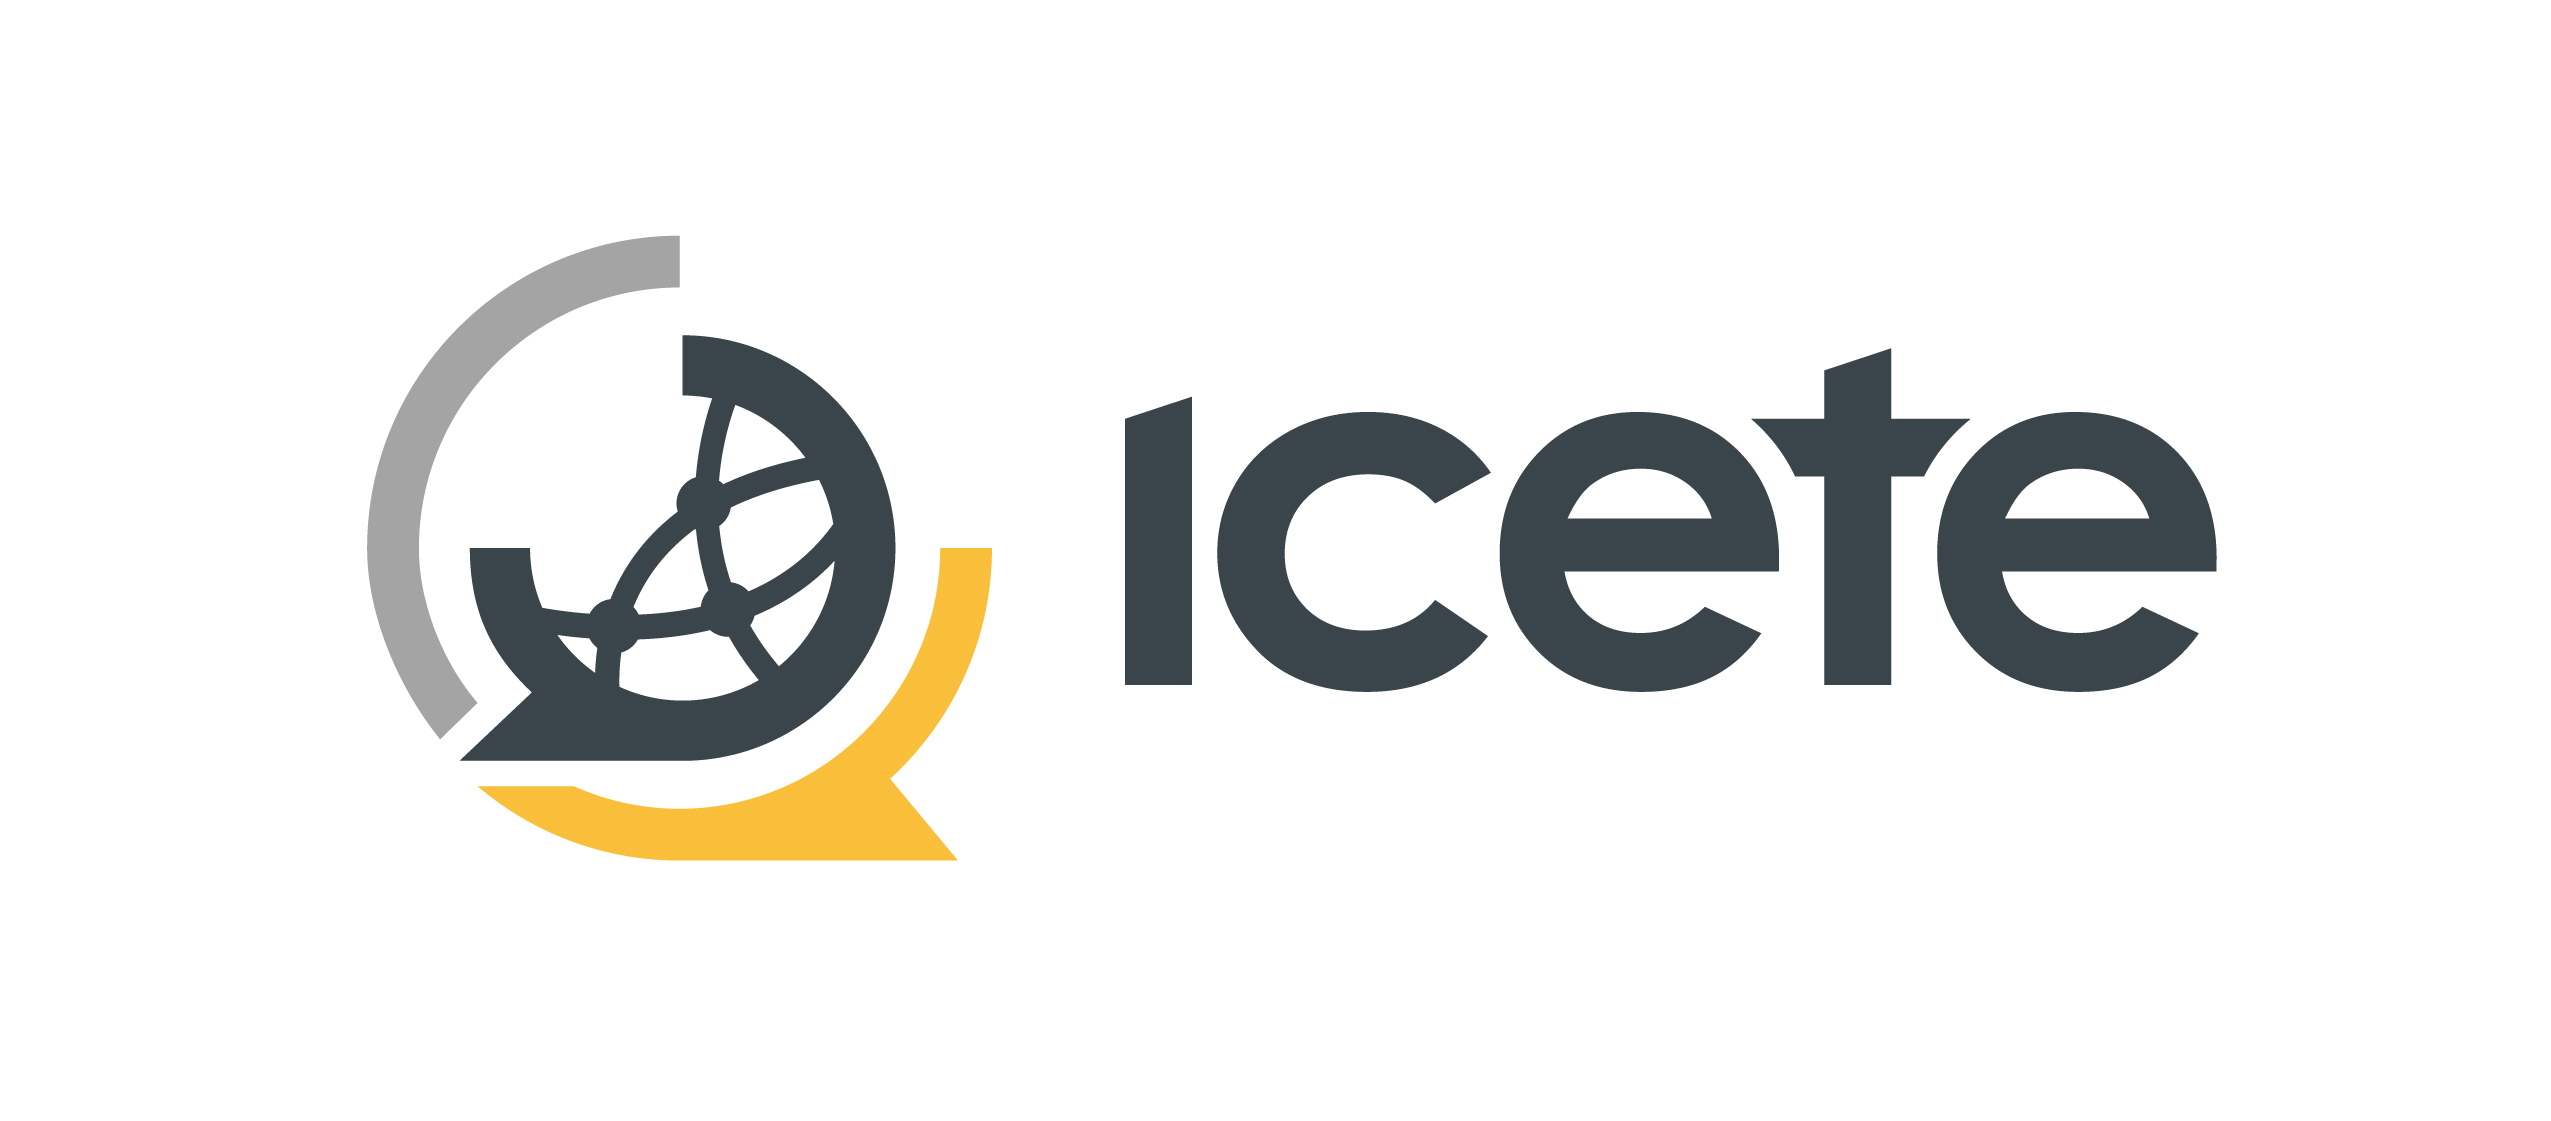 International Council for Evangelical Theological Education (ICETE) Logo